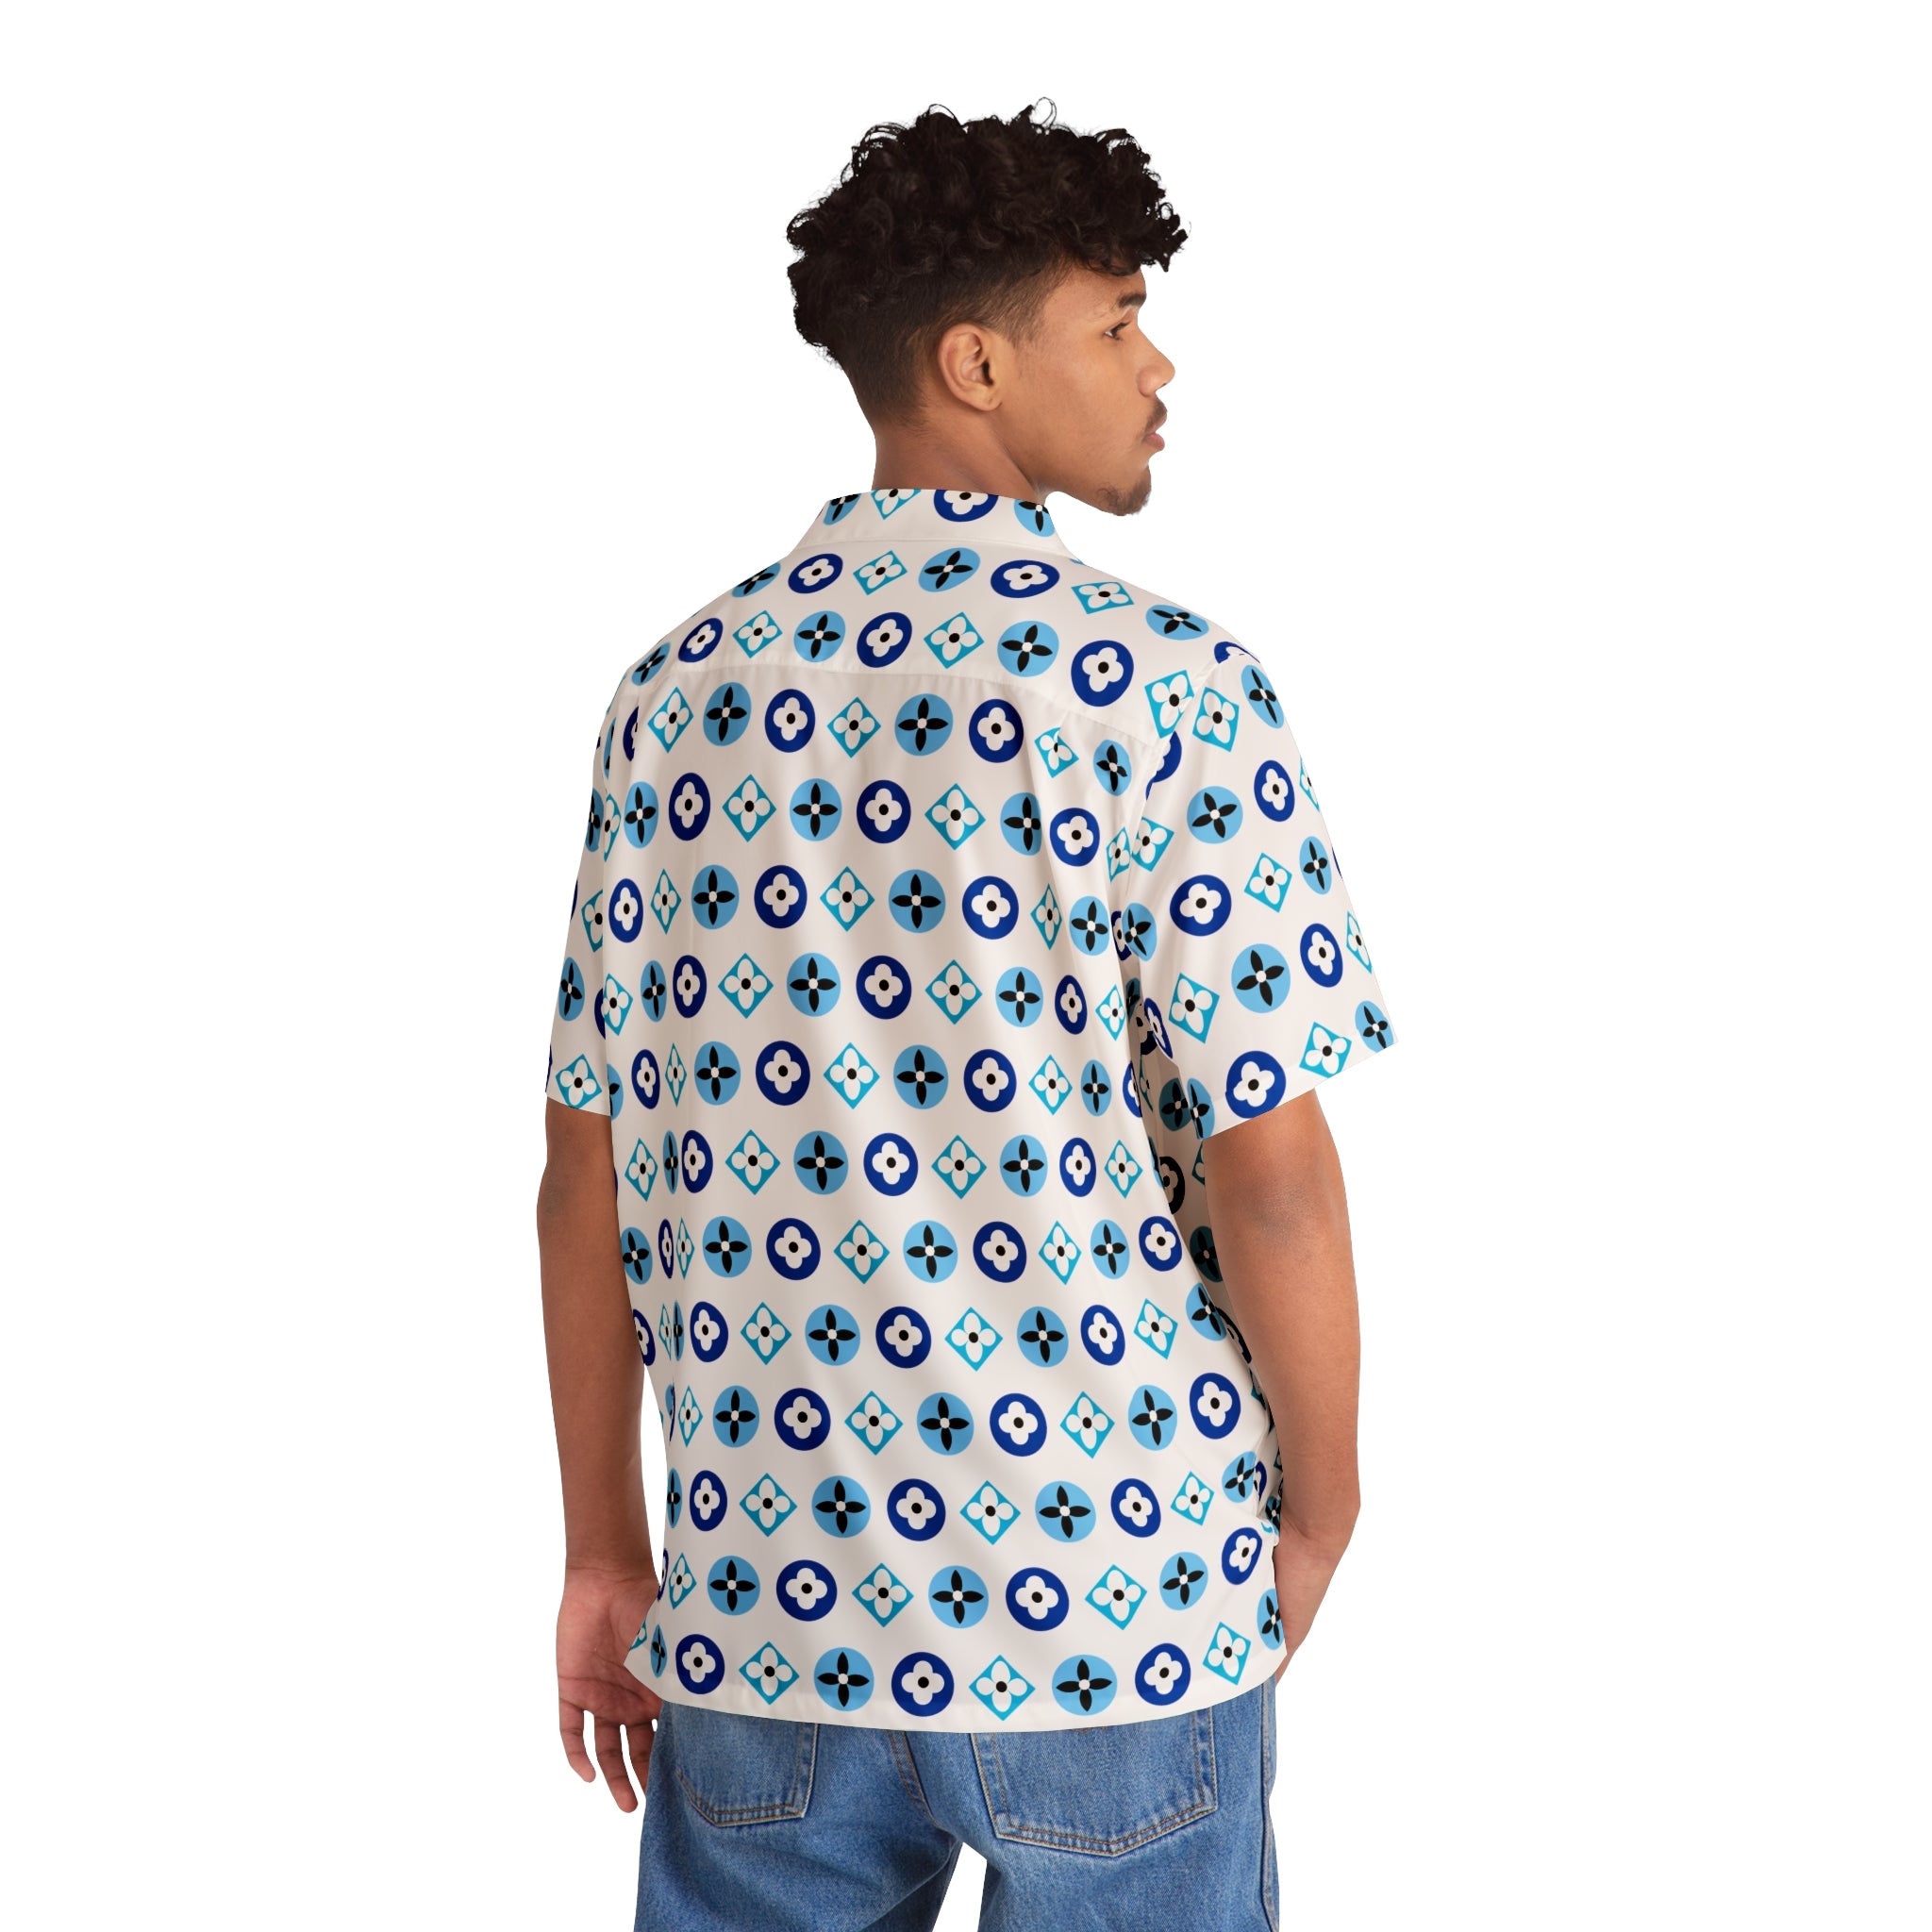  Groove Collection Trilogy of Icons Pattern (Blues) Unisex Gender Neutral White Button Up Shirt, Hawaiian Shirt Men's Shirts